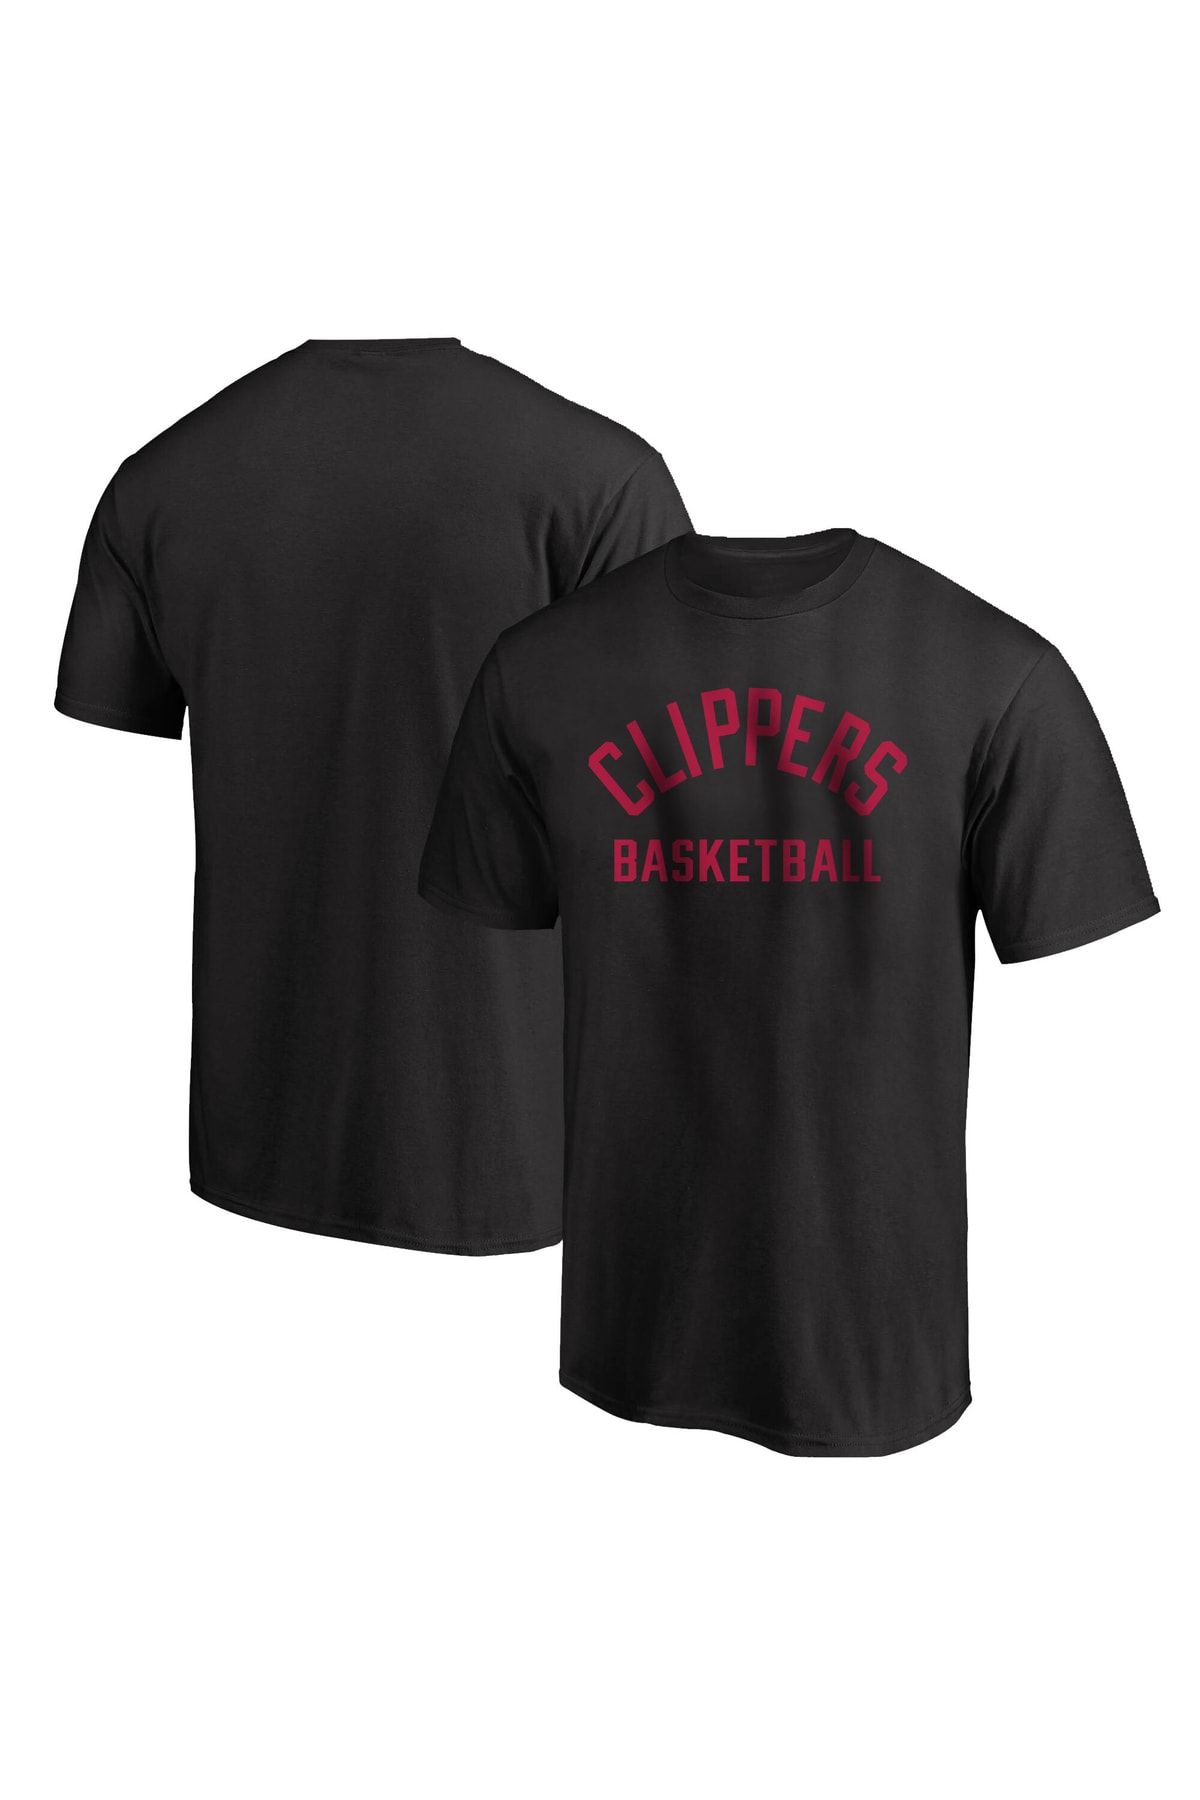 Usateamfans L.a. Clippers Basketball Tshirt